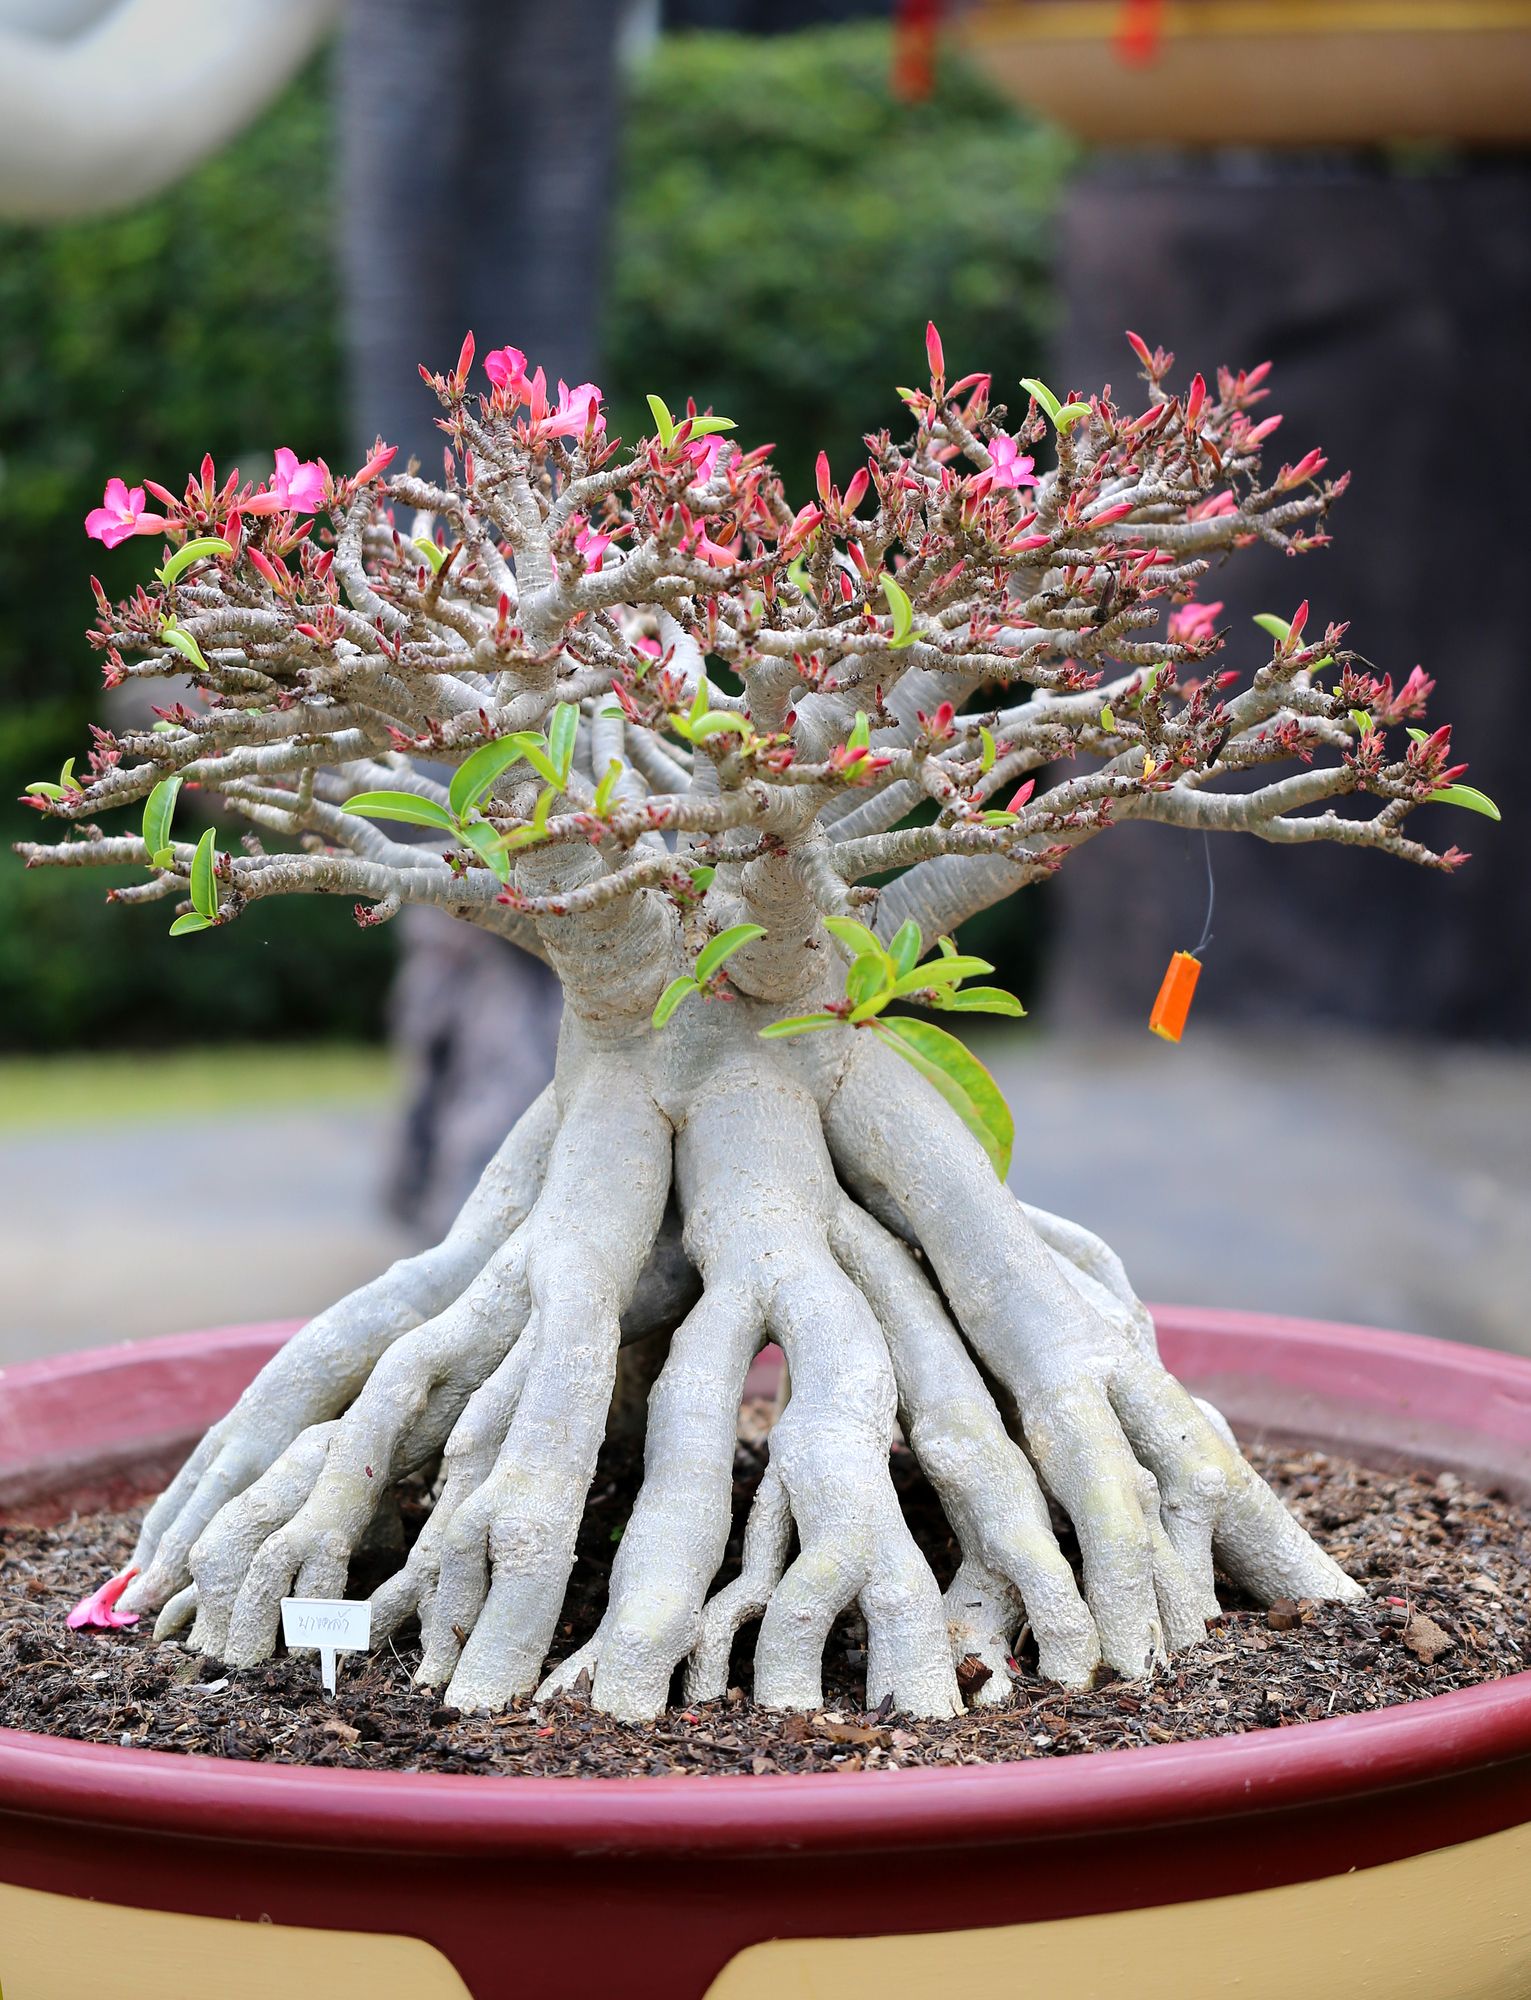 Bonsai roots going up serves as foundation and blooms in cute little pink flowers